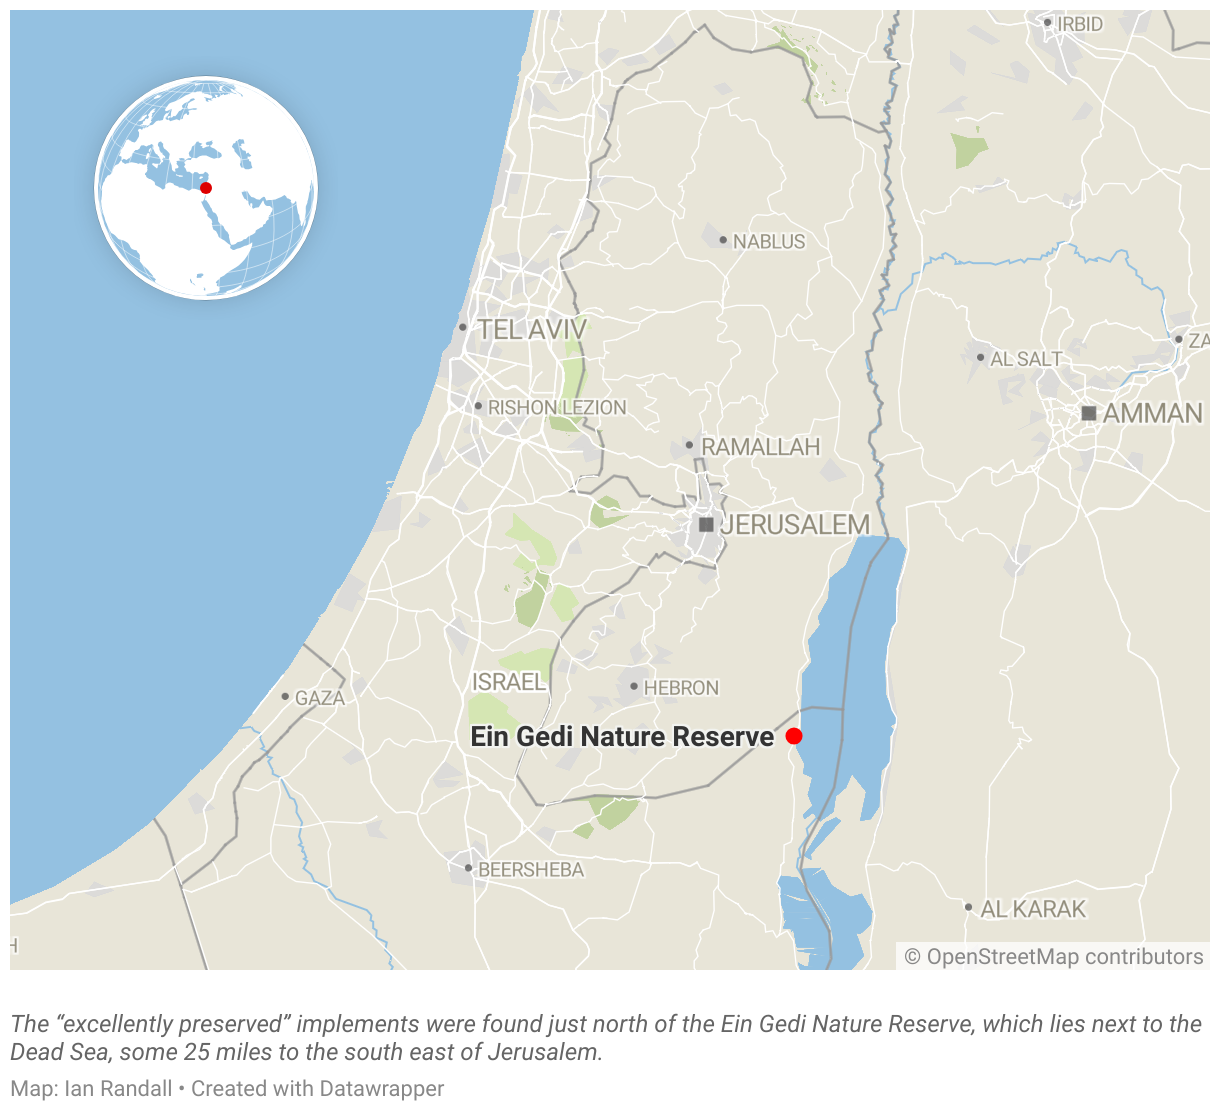 A map of Israel, showing the location of the Ein Gedi Nature Reserve, near where the Roman weapons cache was found.